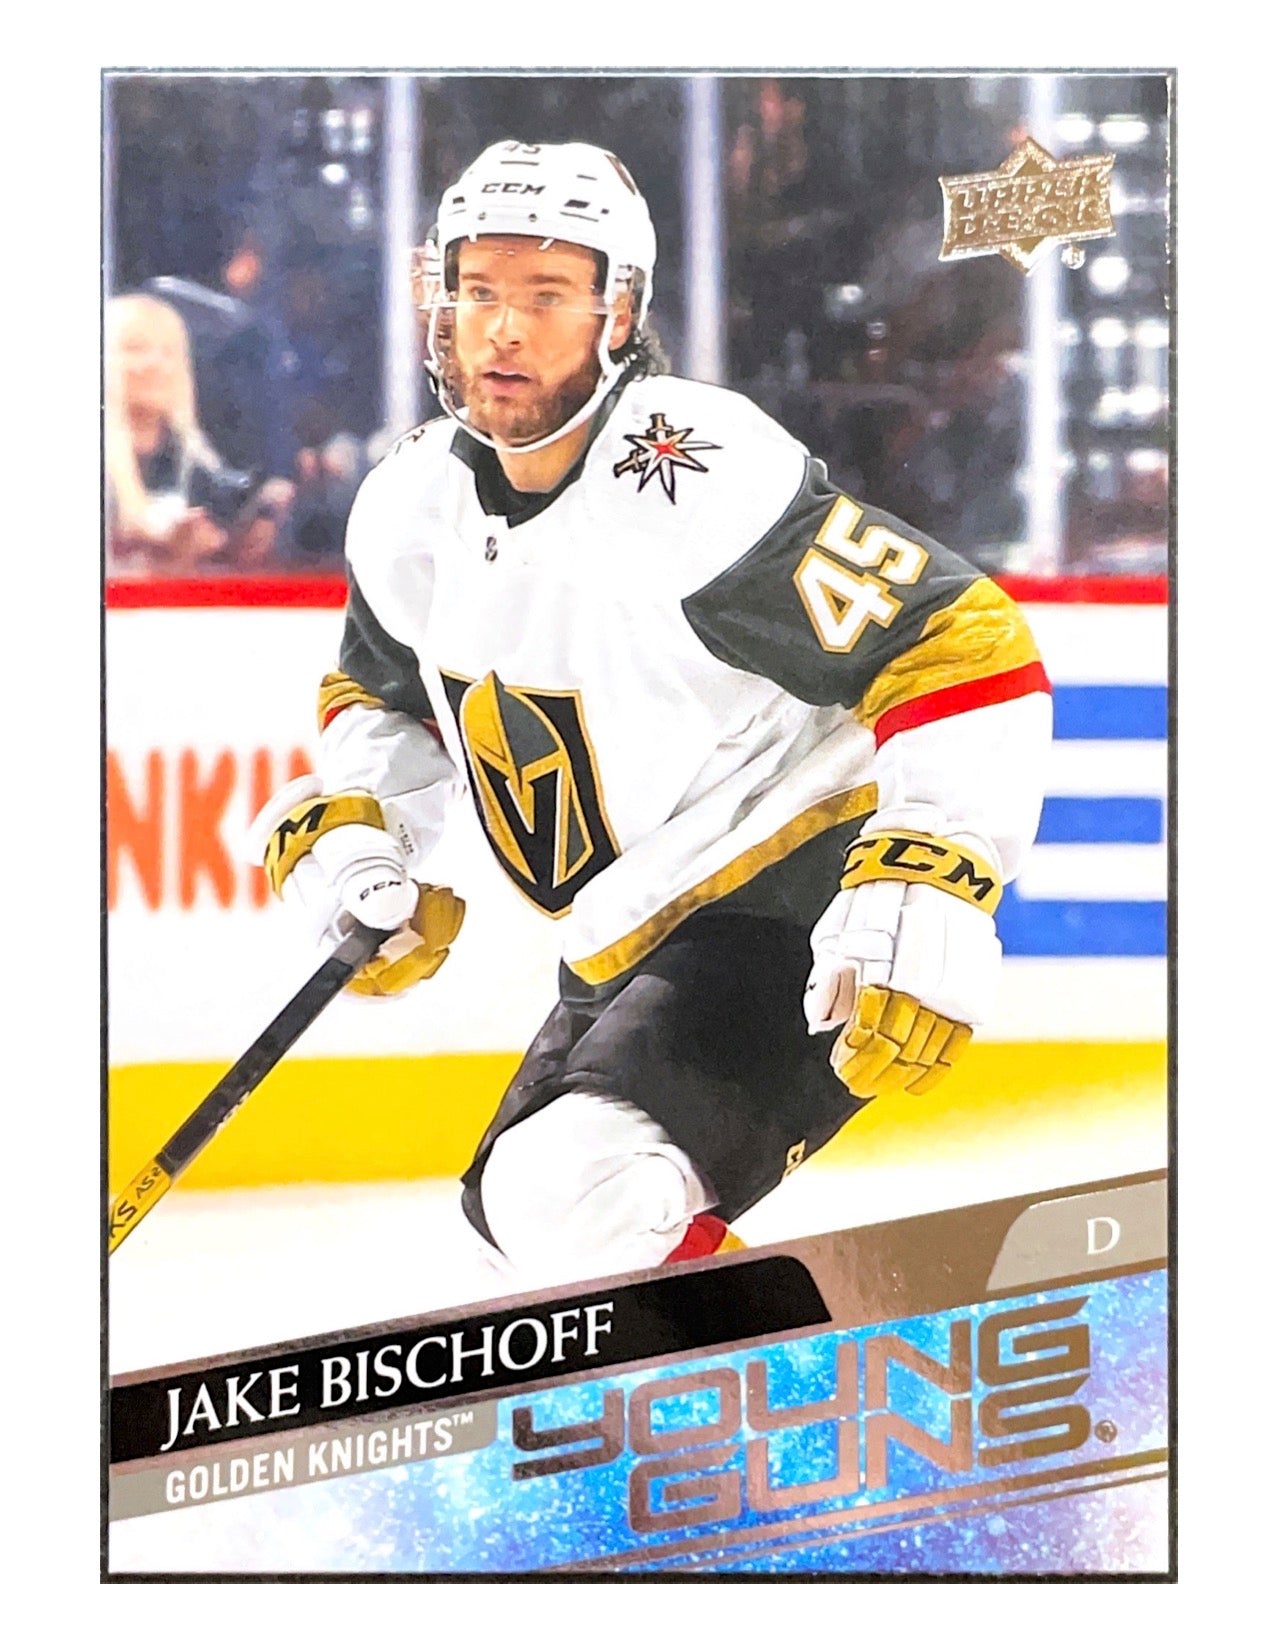 Jake Bischoff 2020-21 Upper Deck Extended Series Young Guns #713